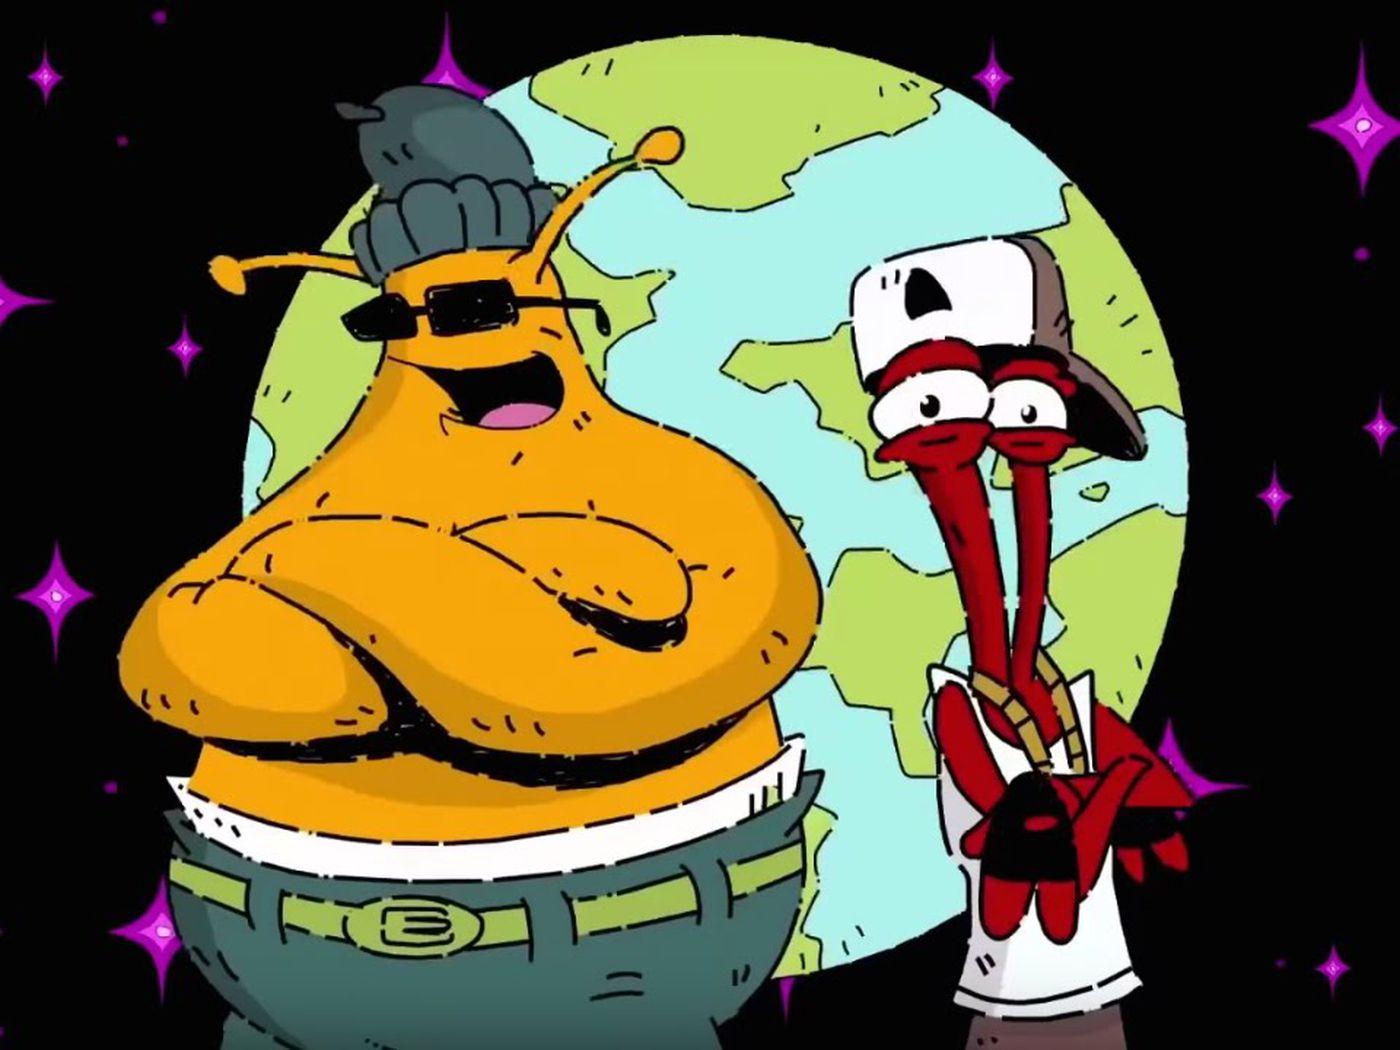 ToeJam & Earl's new game pushed into 2018